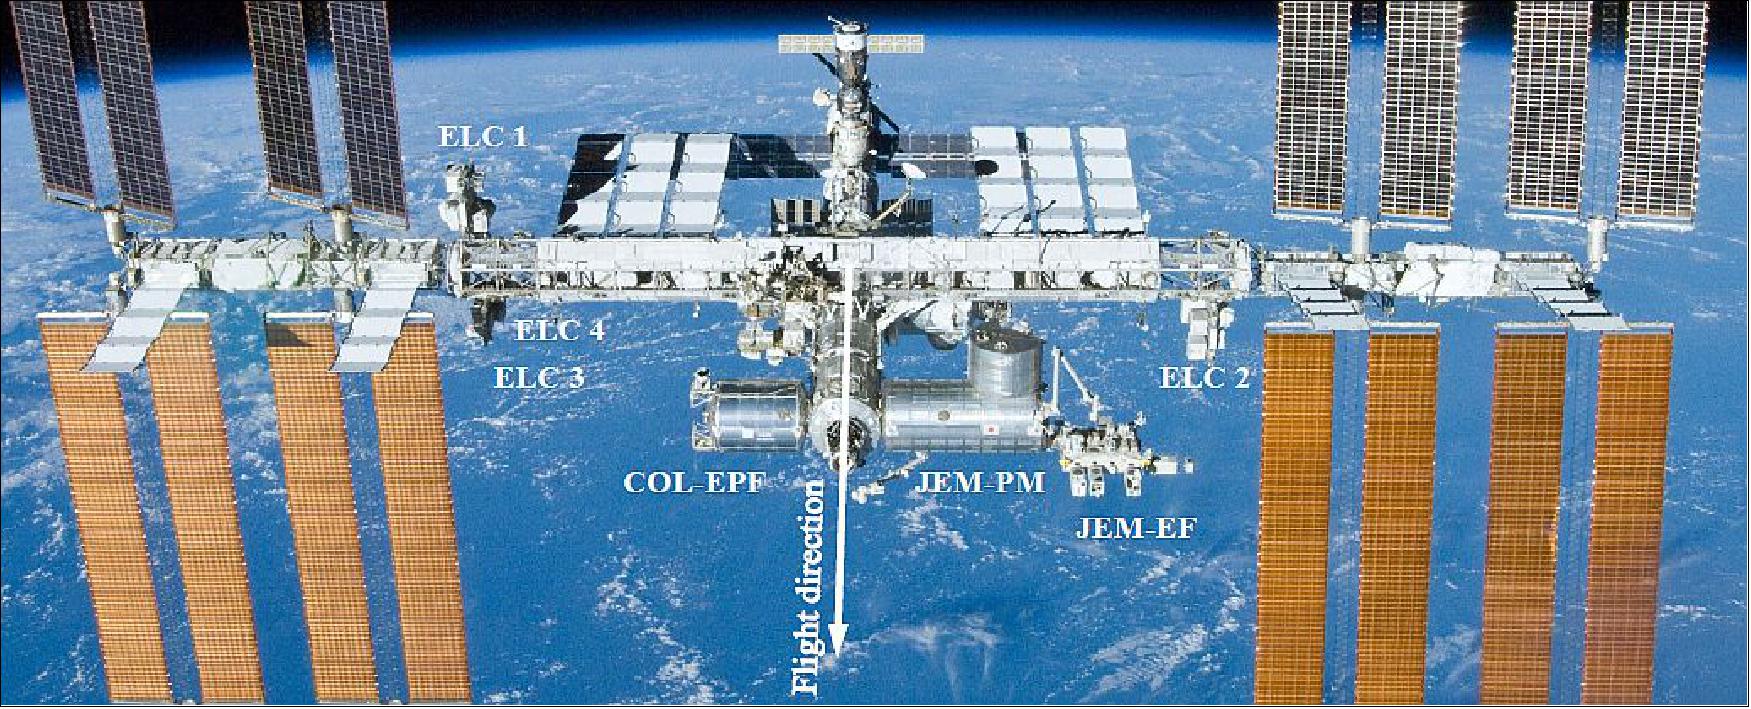 Figure 1: Currently existing external payload facilities on the International Space Station (image credit: NASA)